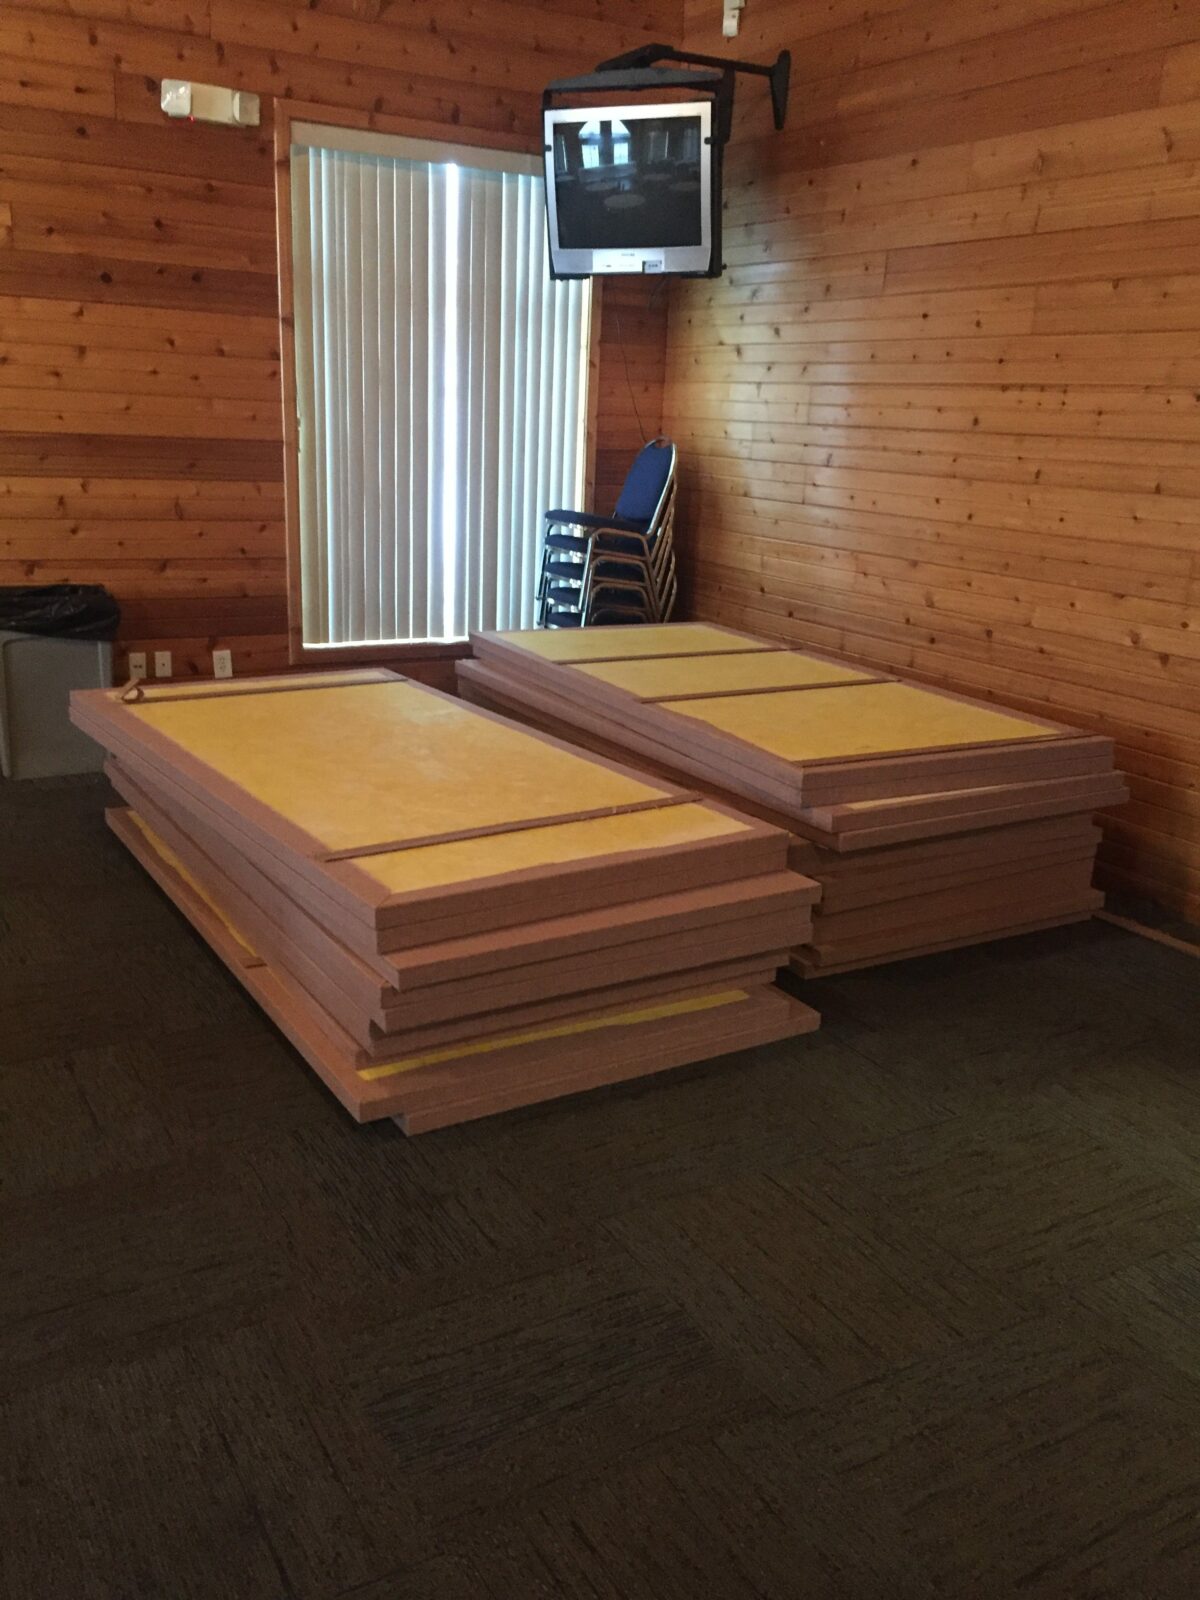 sound panels prepared to install to soundproof a room